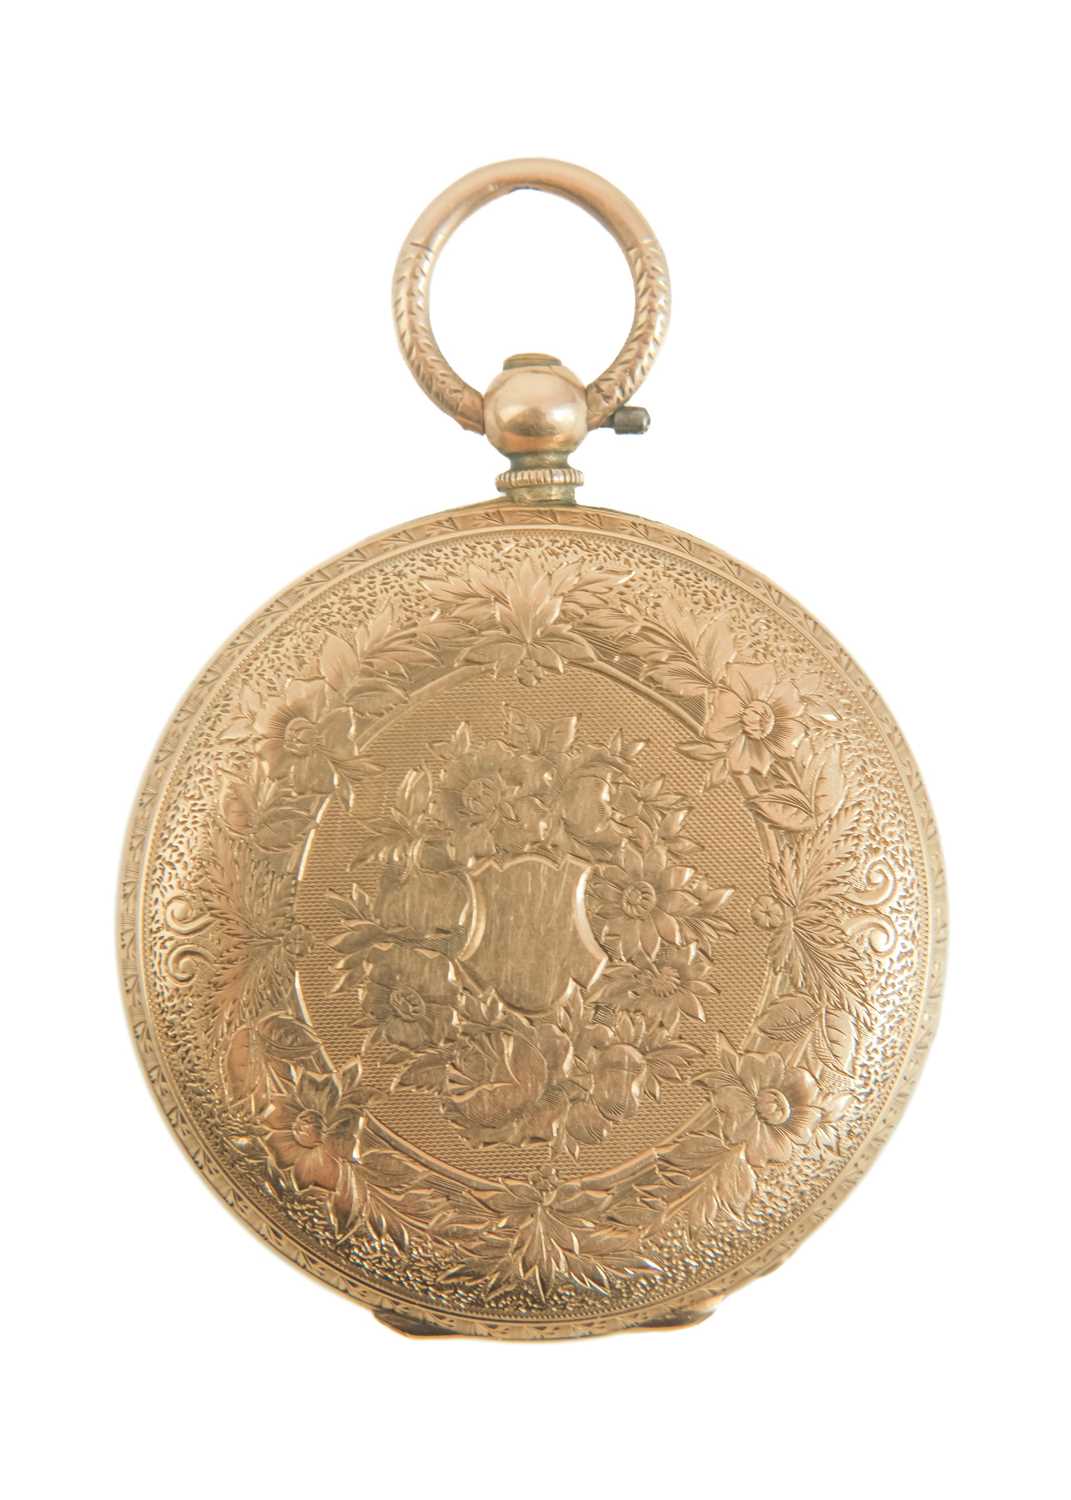 A 14ct cased key wind lady's fob Swiss cylinder pocket watch. - Image 4 of 8